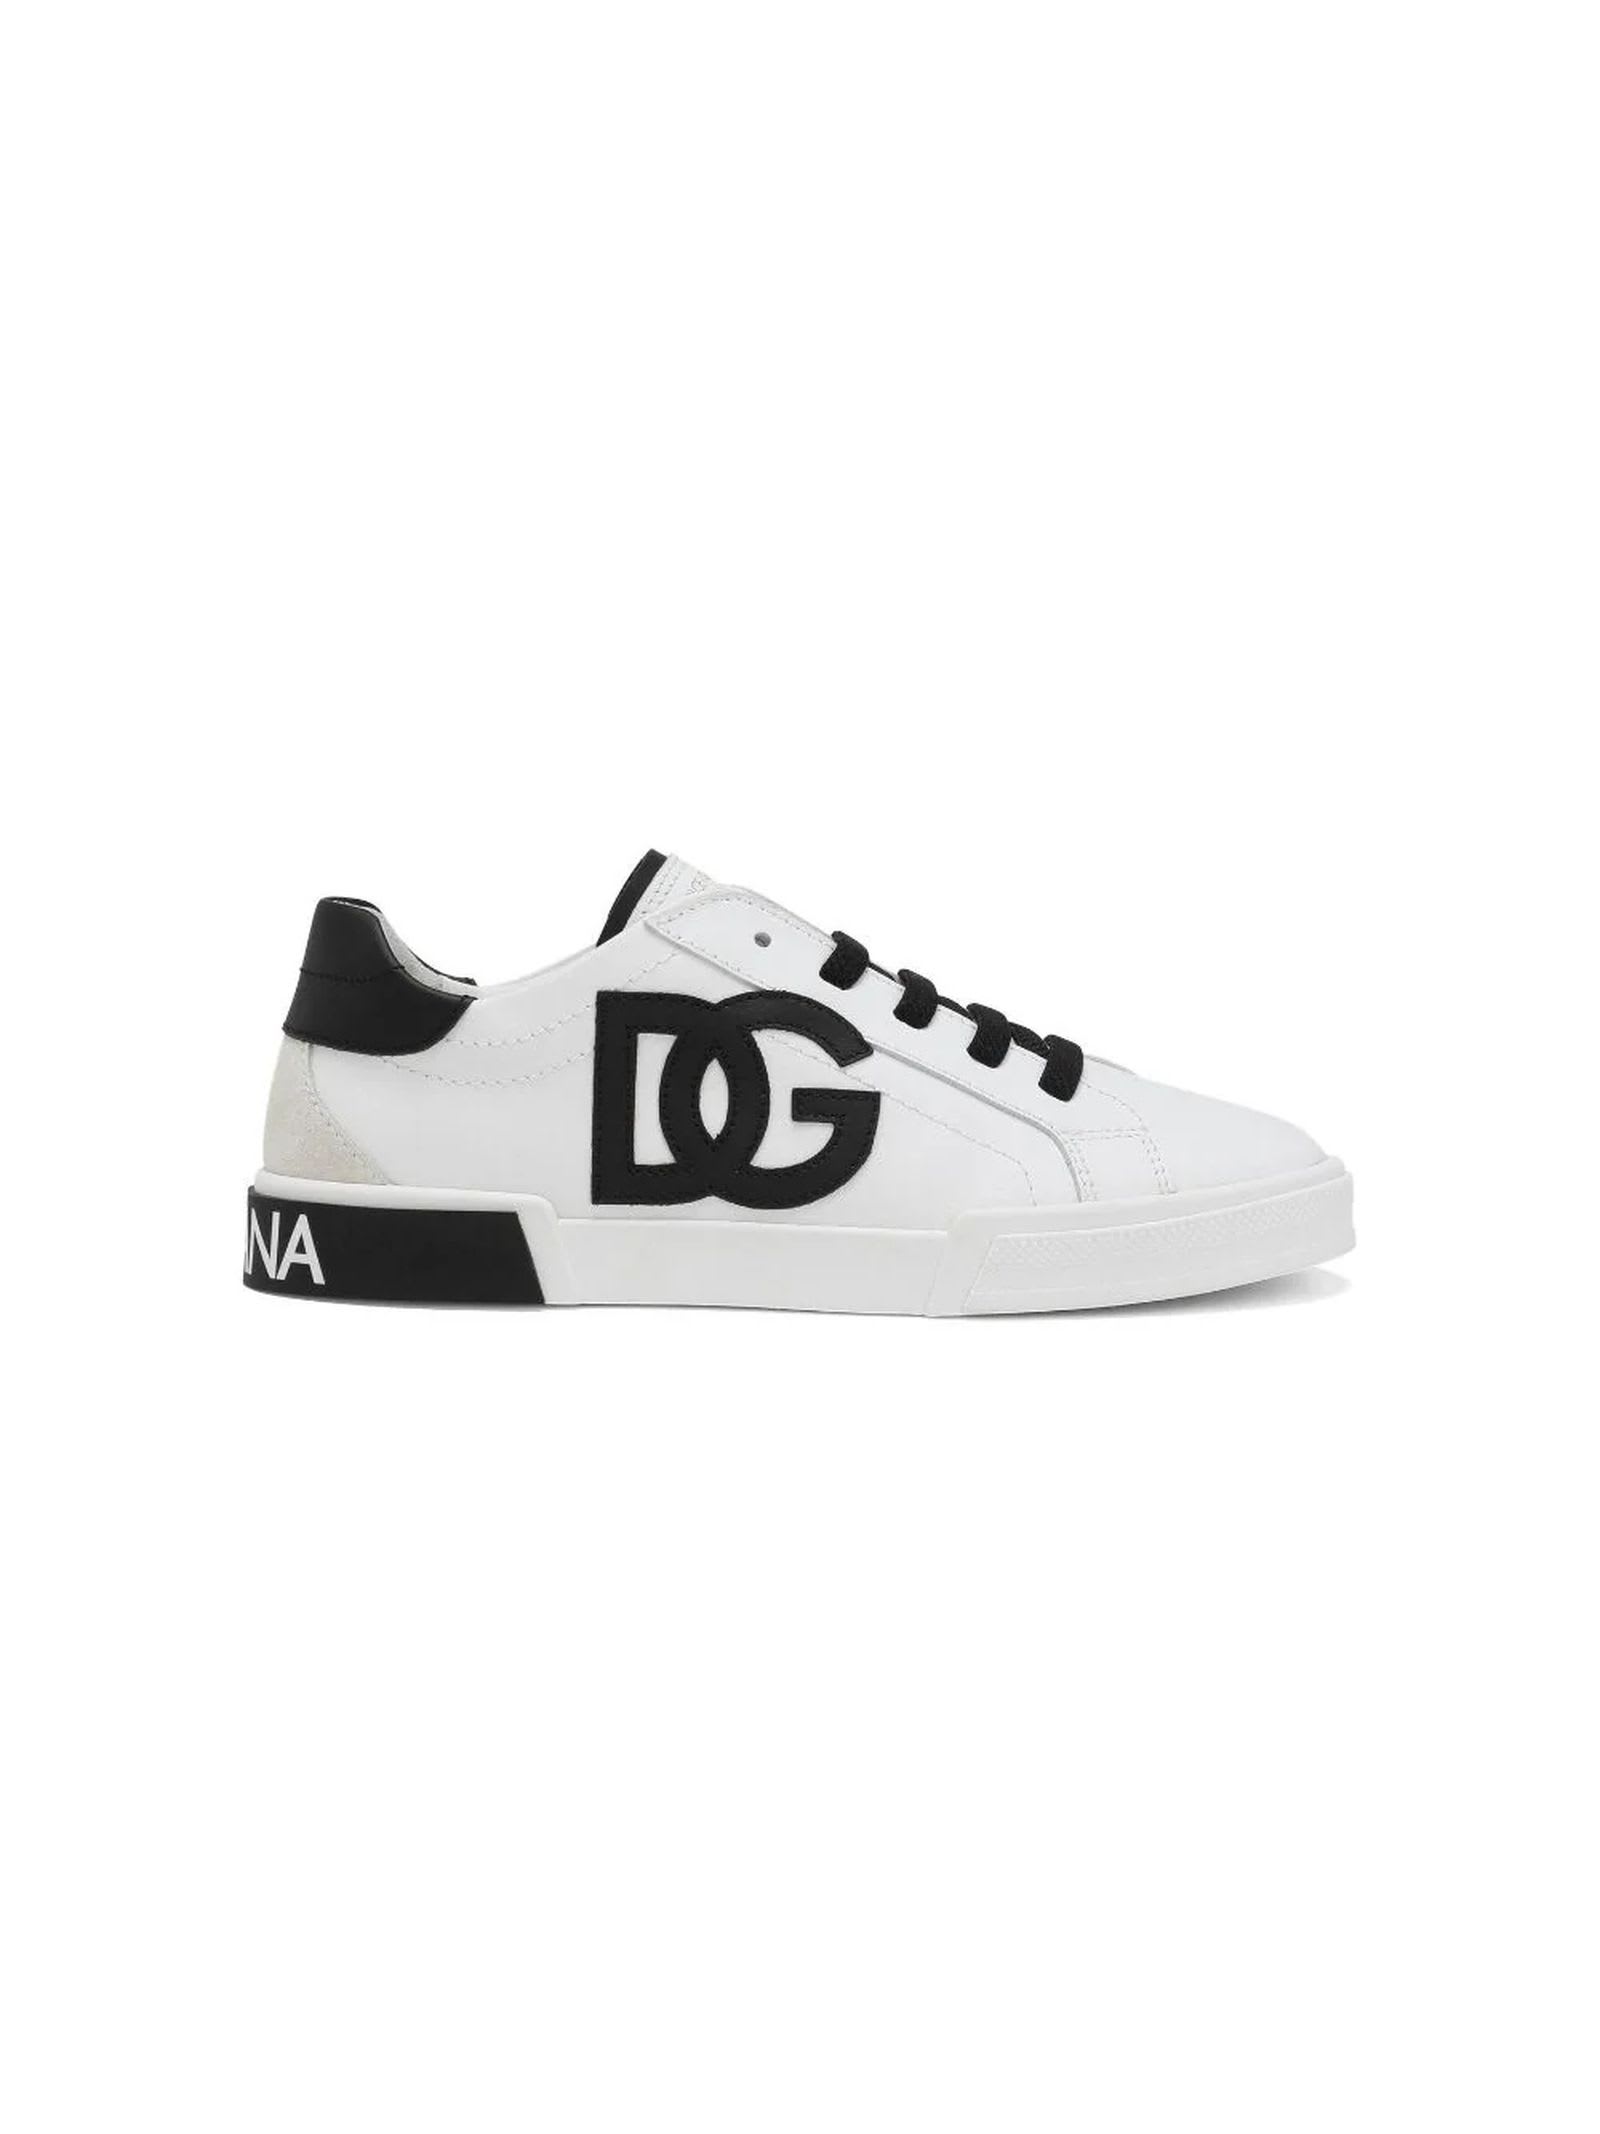 Dolce & Gabbana White Calf Leather Sneakers